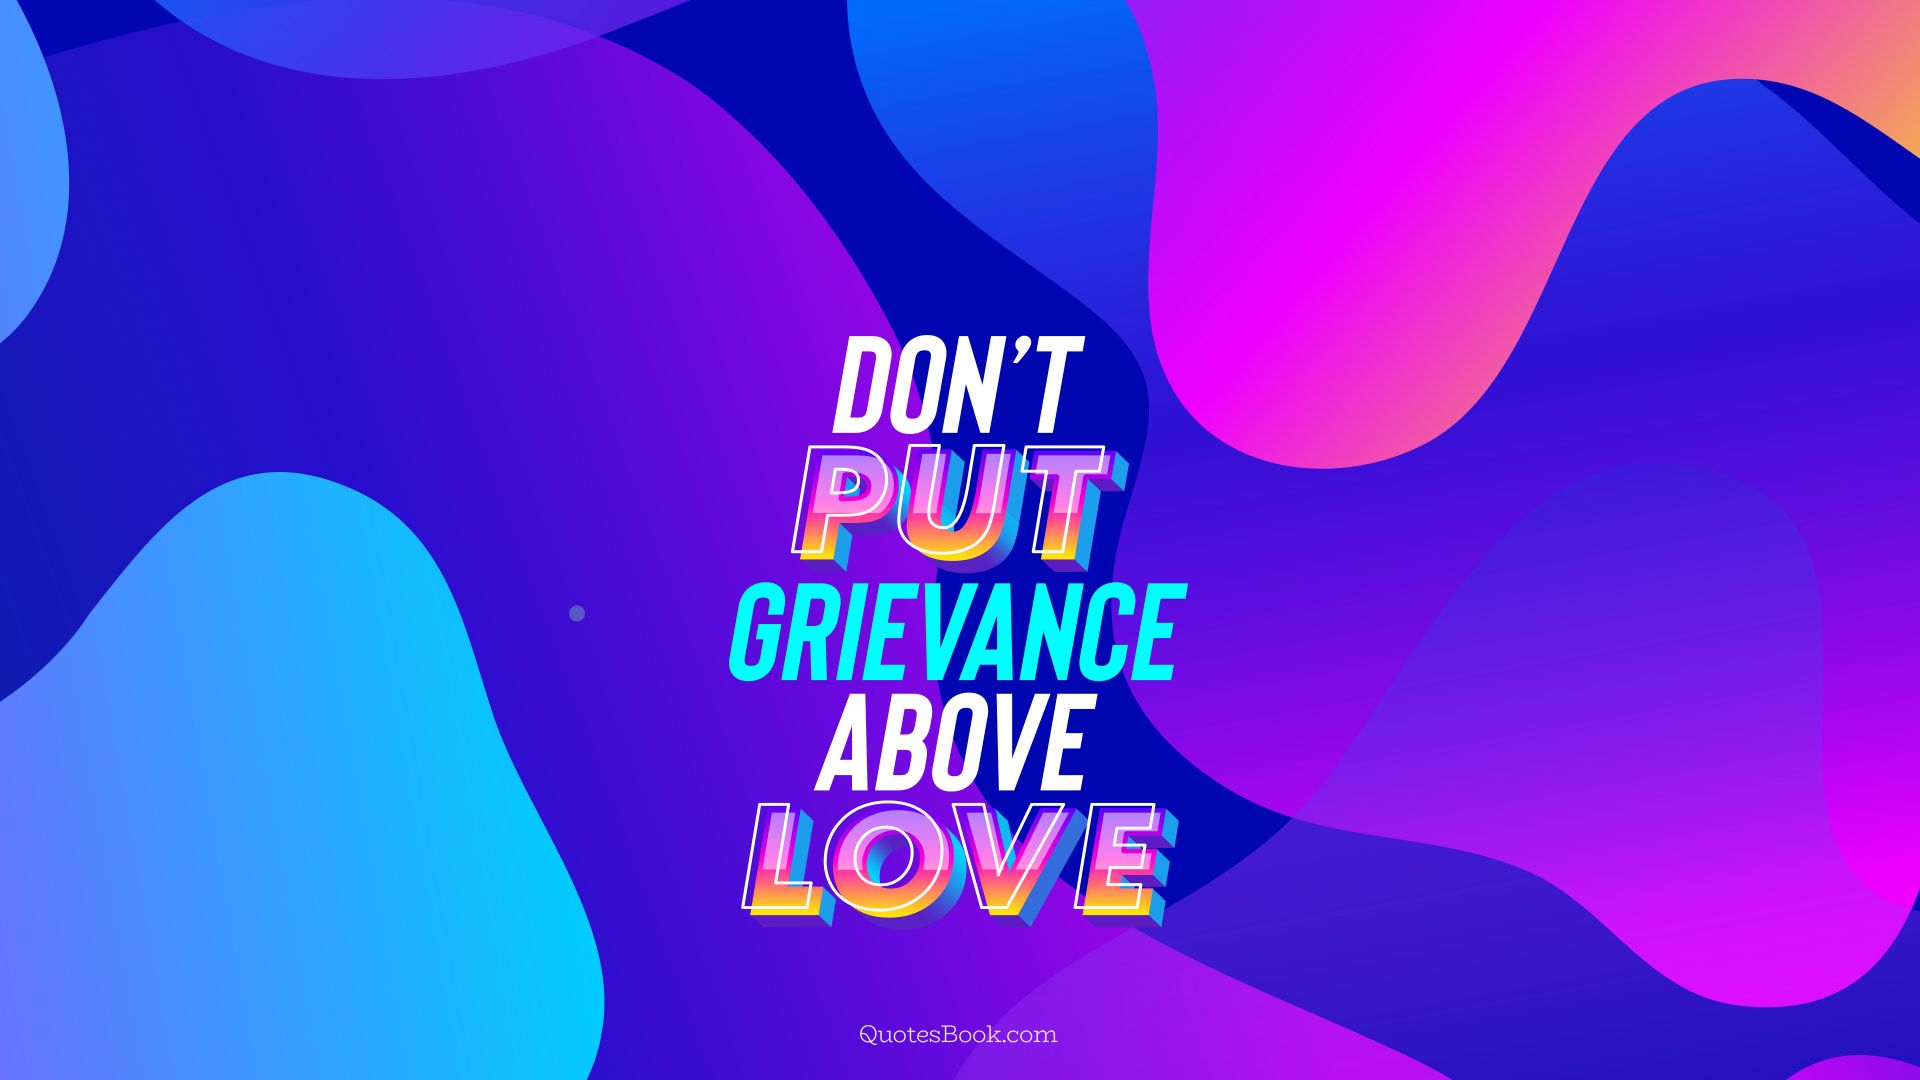 Don’t put grievance above love. - Quote by QuotesBook